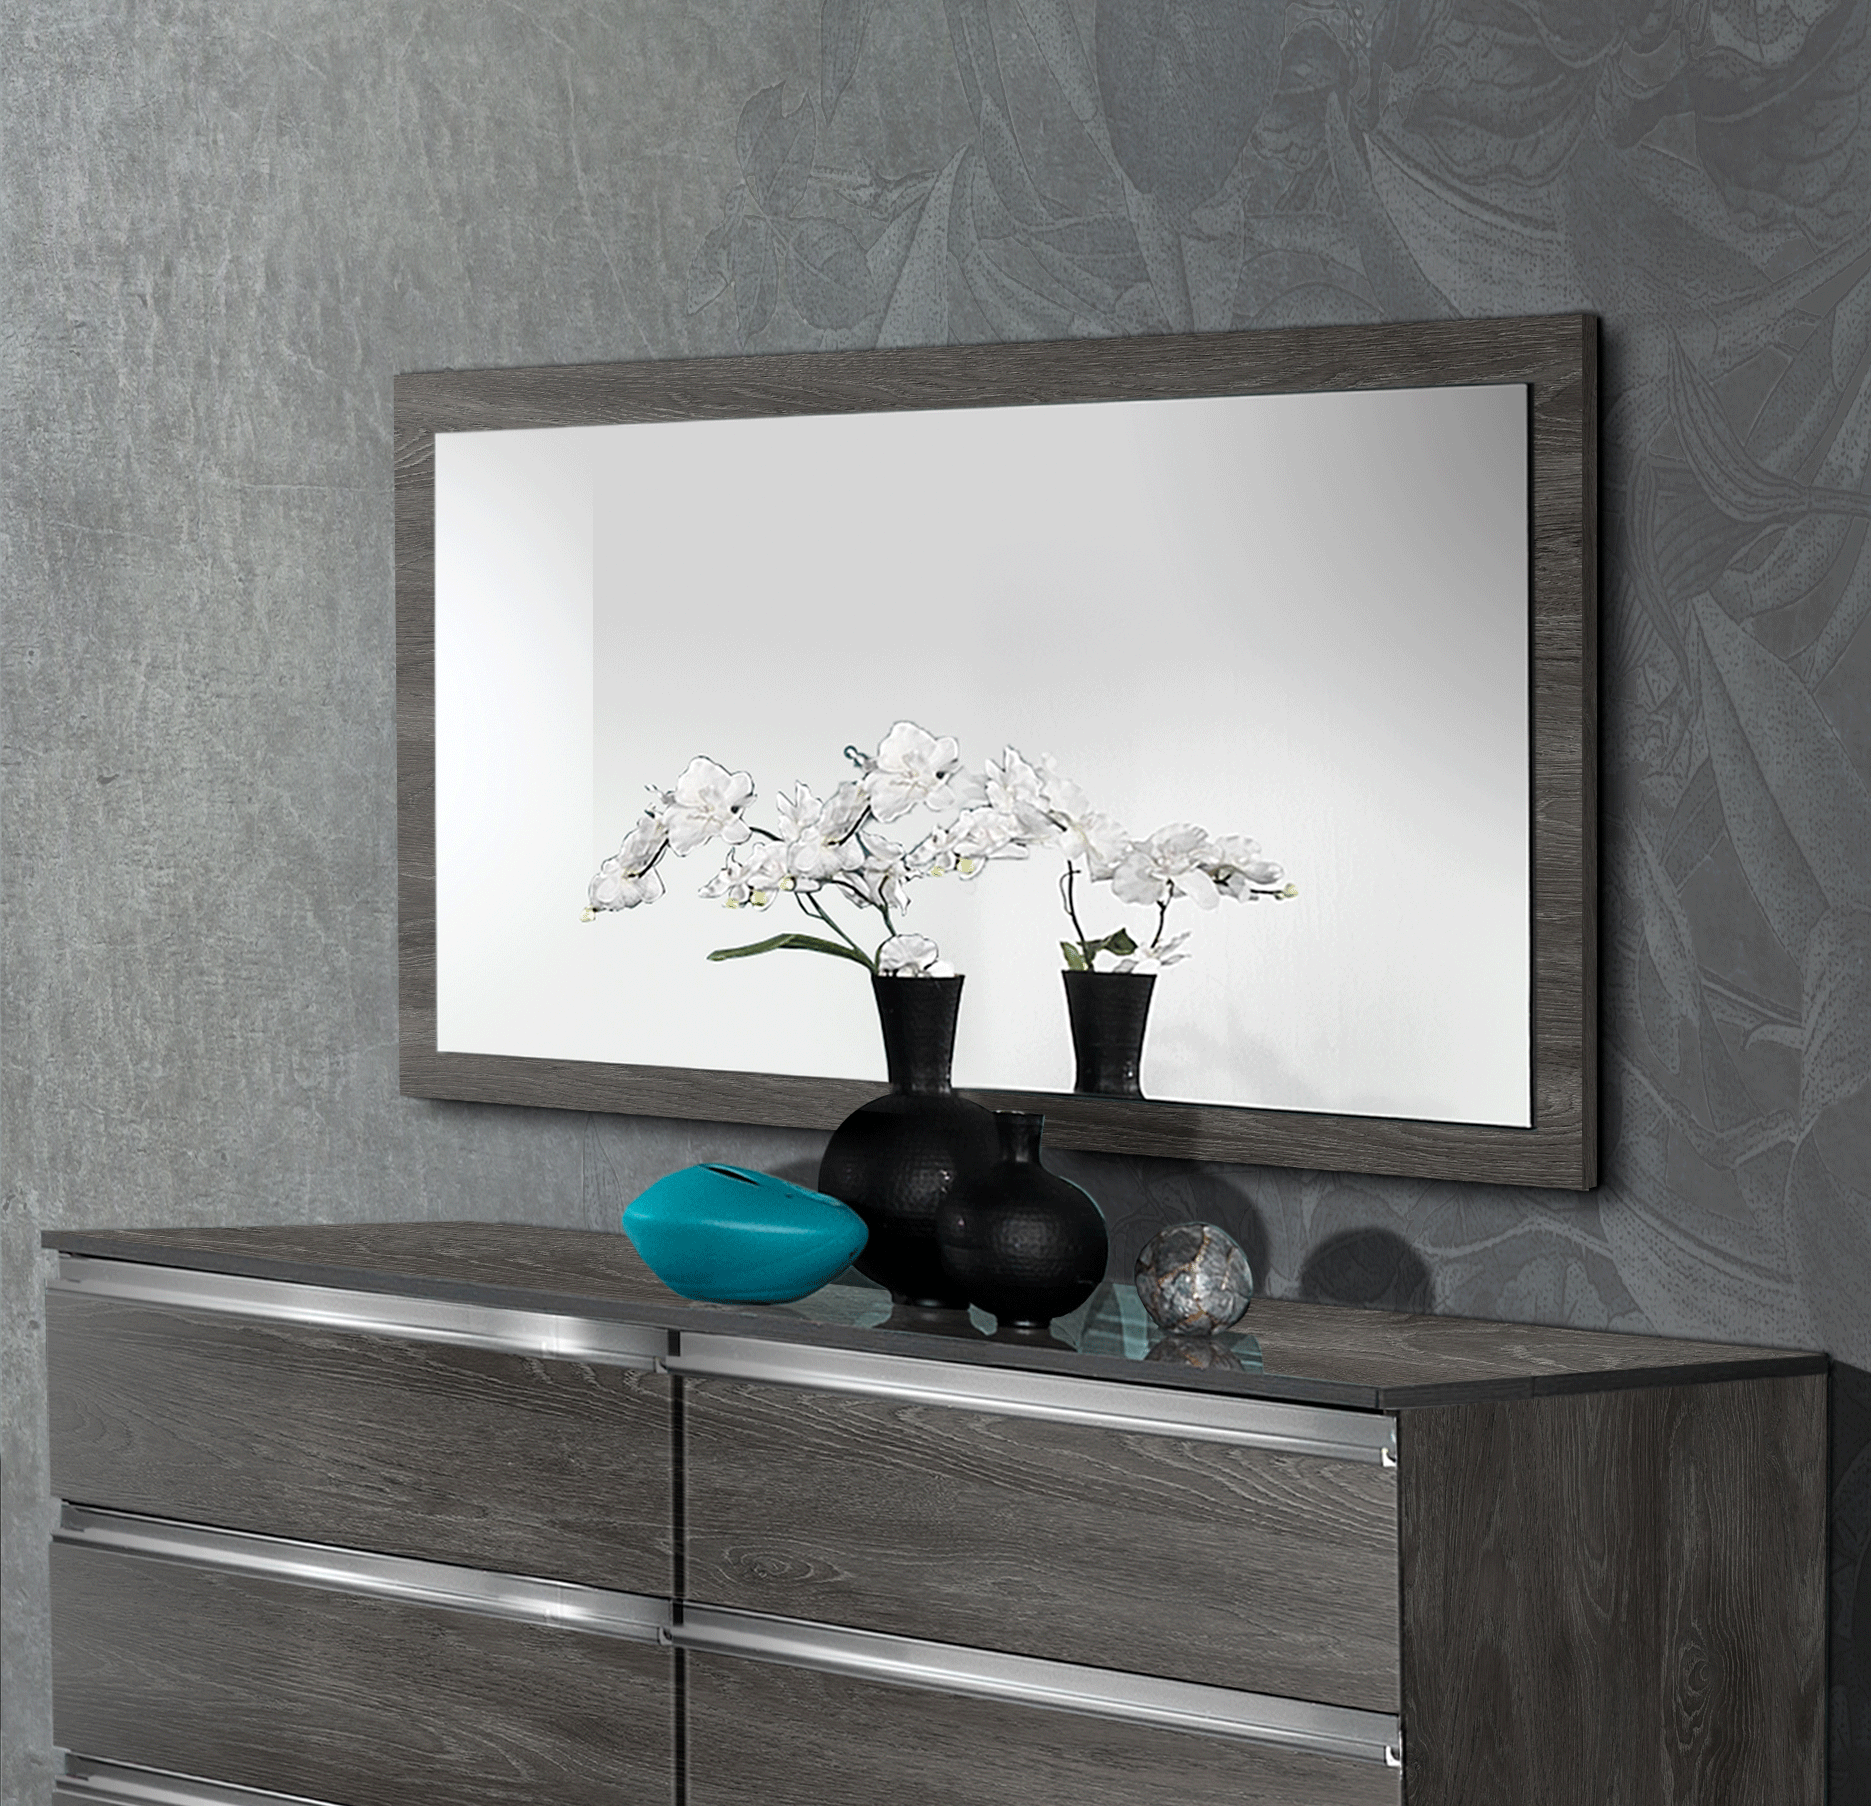 Brands Status Modern Collections, Italy Oxford mirror for dresser